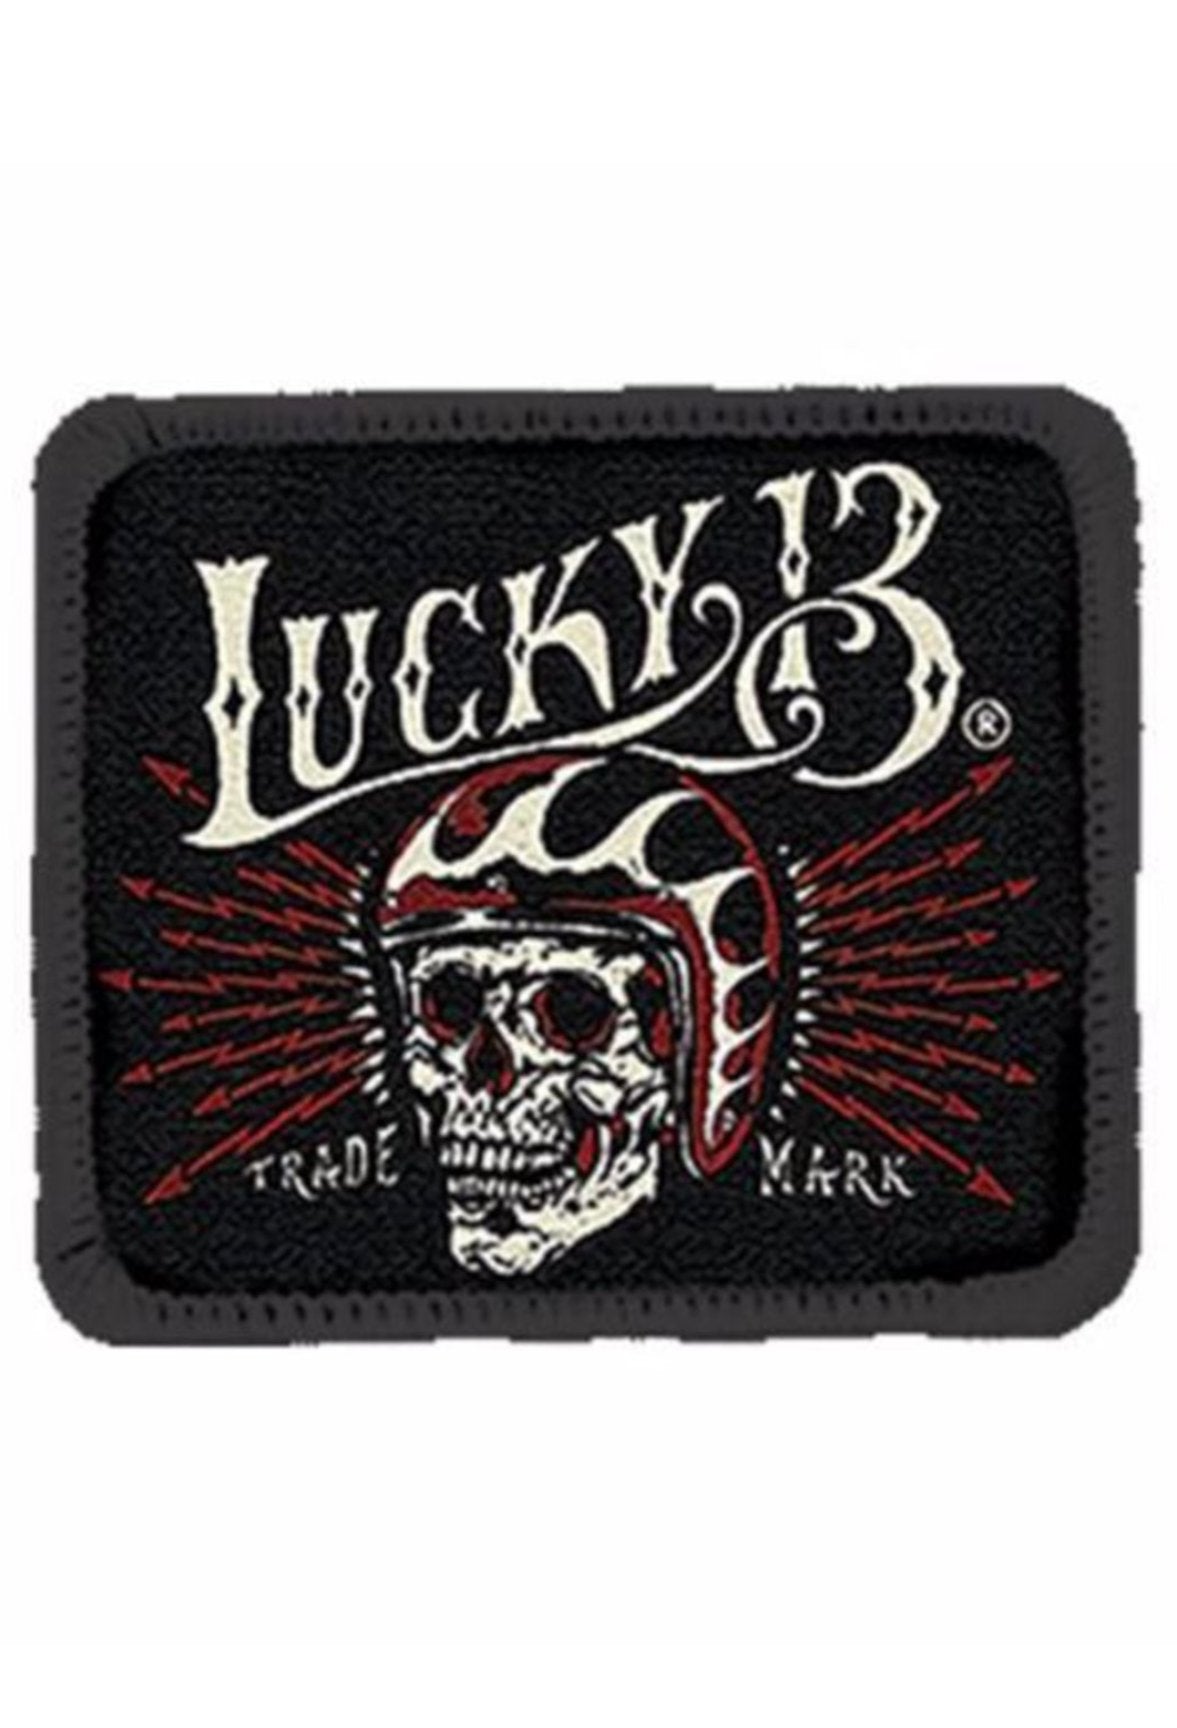 The SKULL BUILT Patch